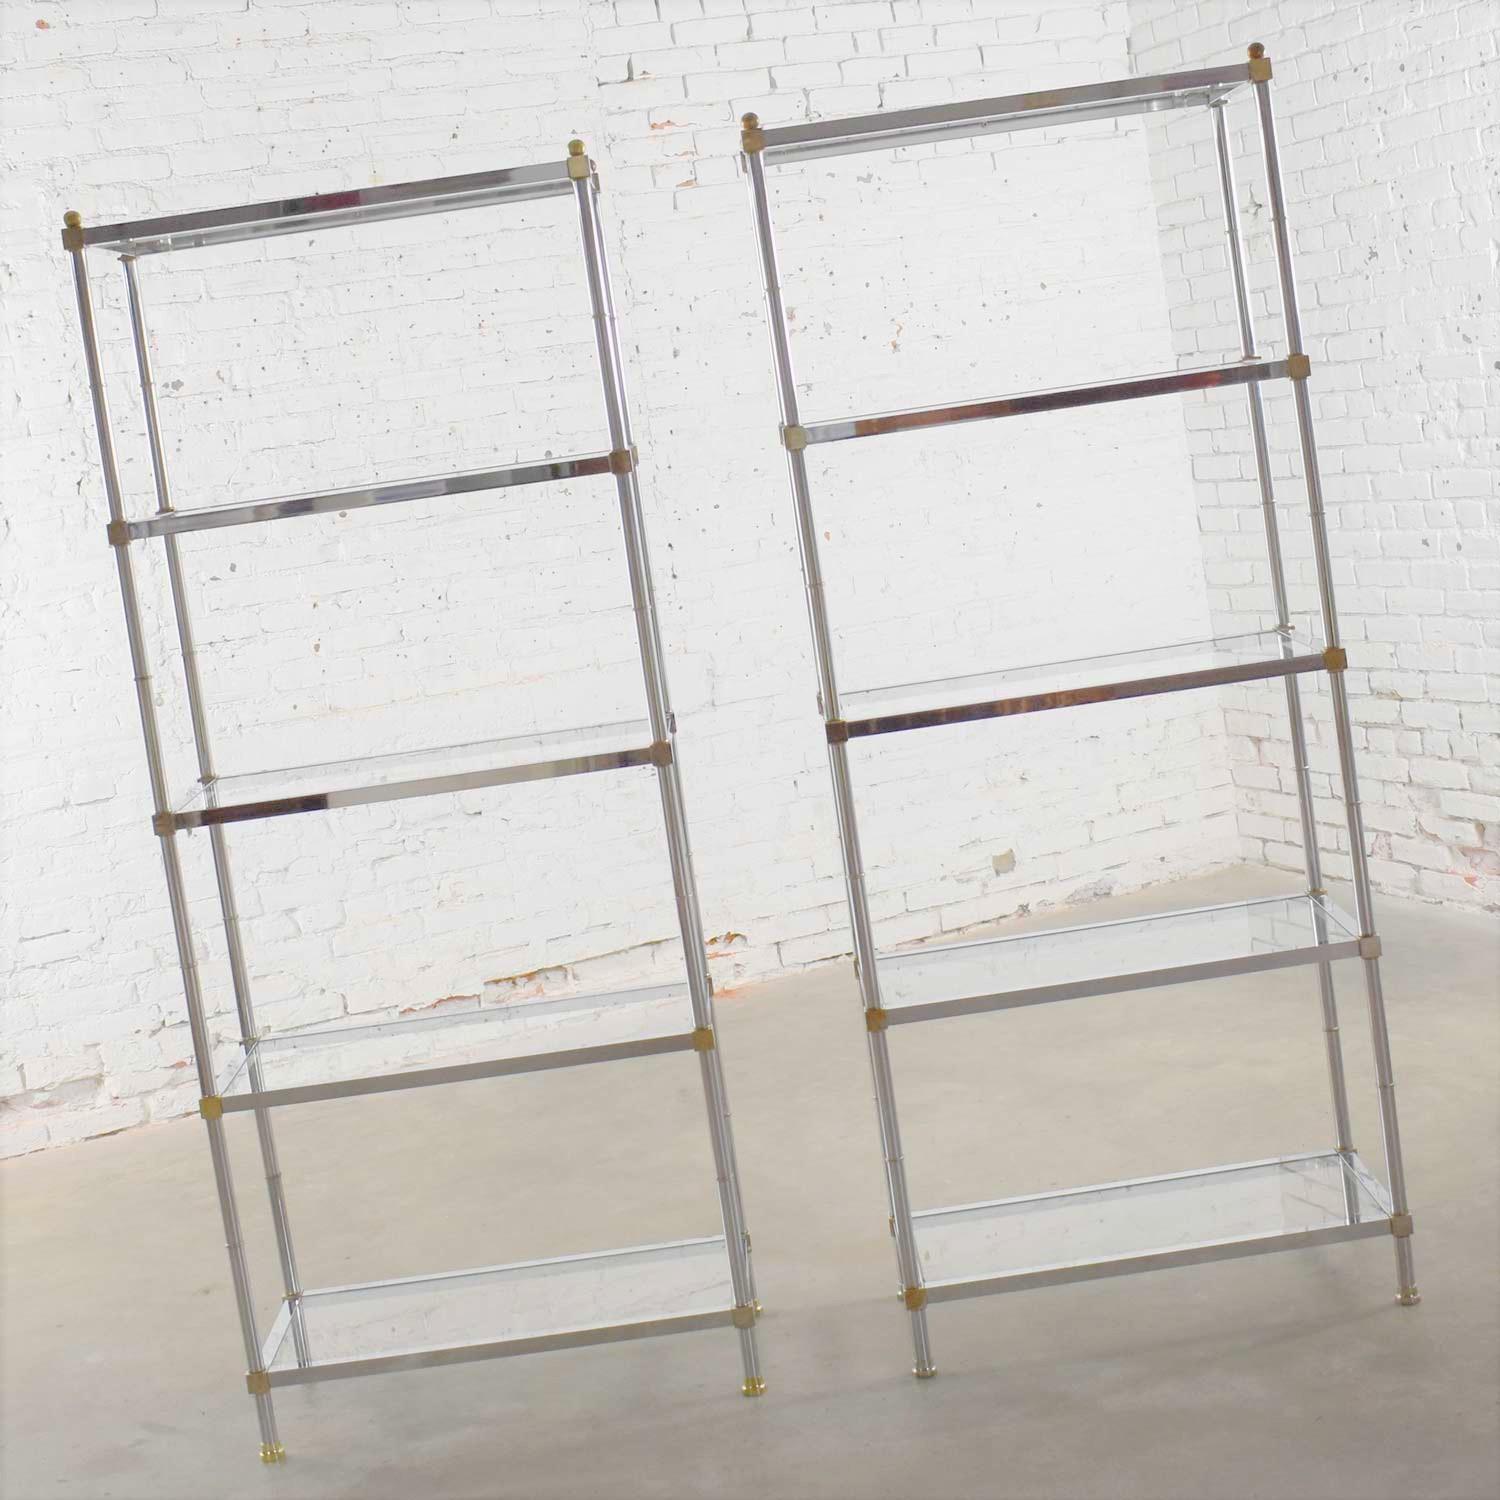 Handsome pair of vintage chrome, brass, and glass étagère display shelves done in the manner of Maison Jansen. They are both in great vintage condition. They do have scratches and marks as you would expect with age and use. We call that patina.